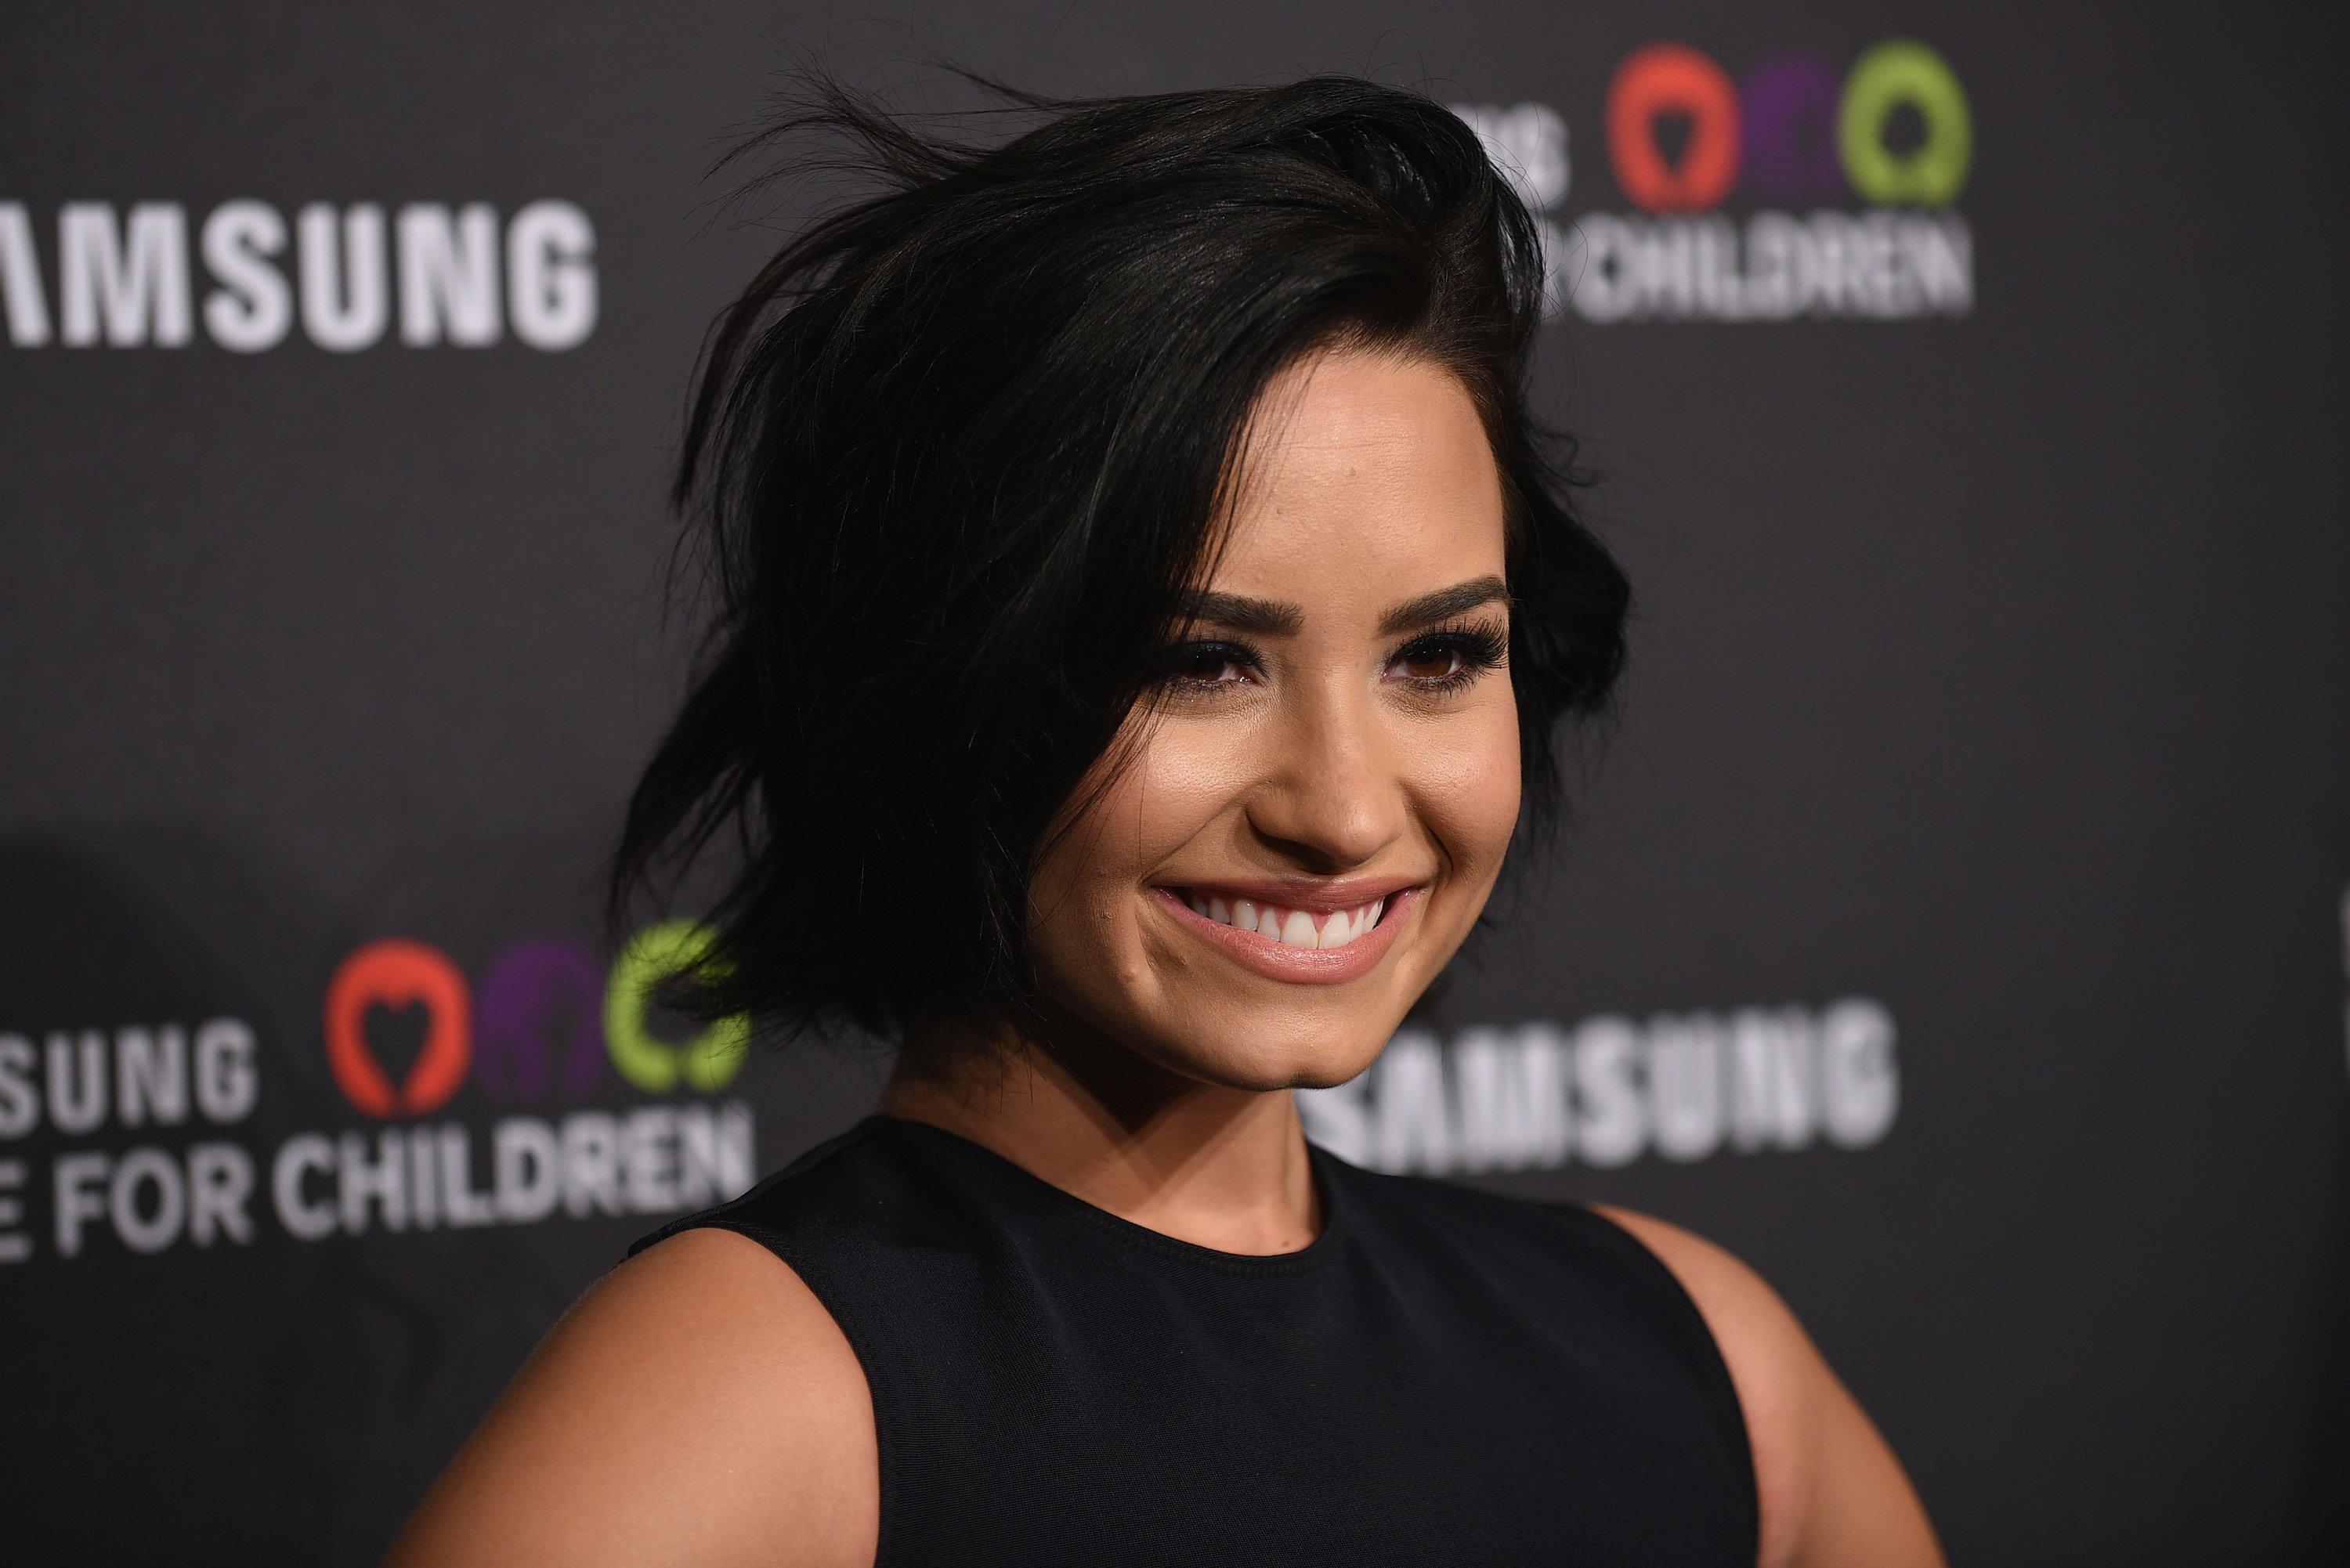 Demi Lovato on September 17, 2015 in New York City | Photo: Getty Images